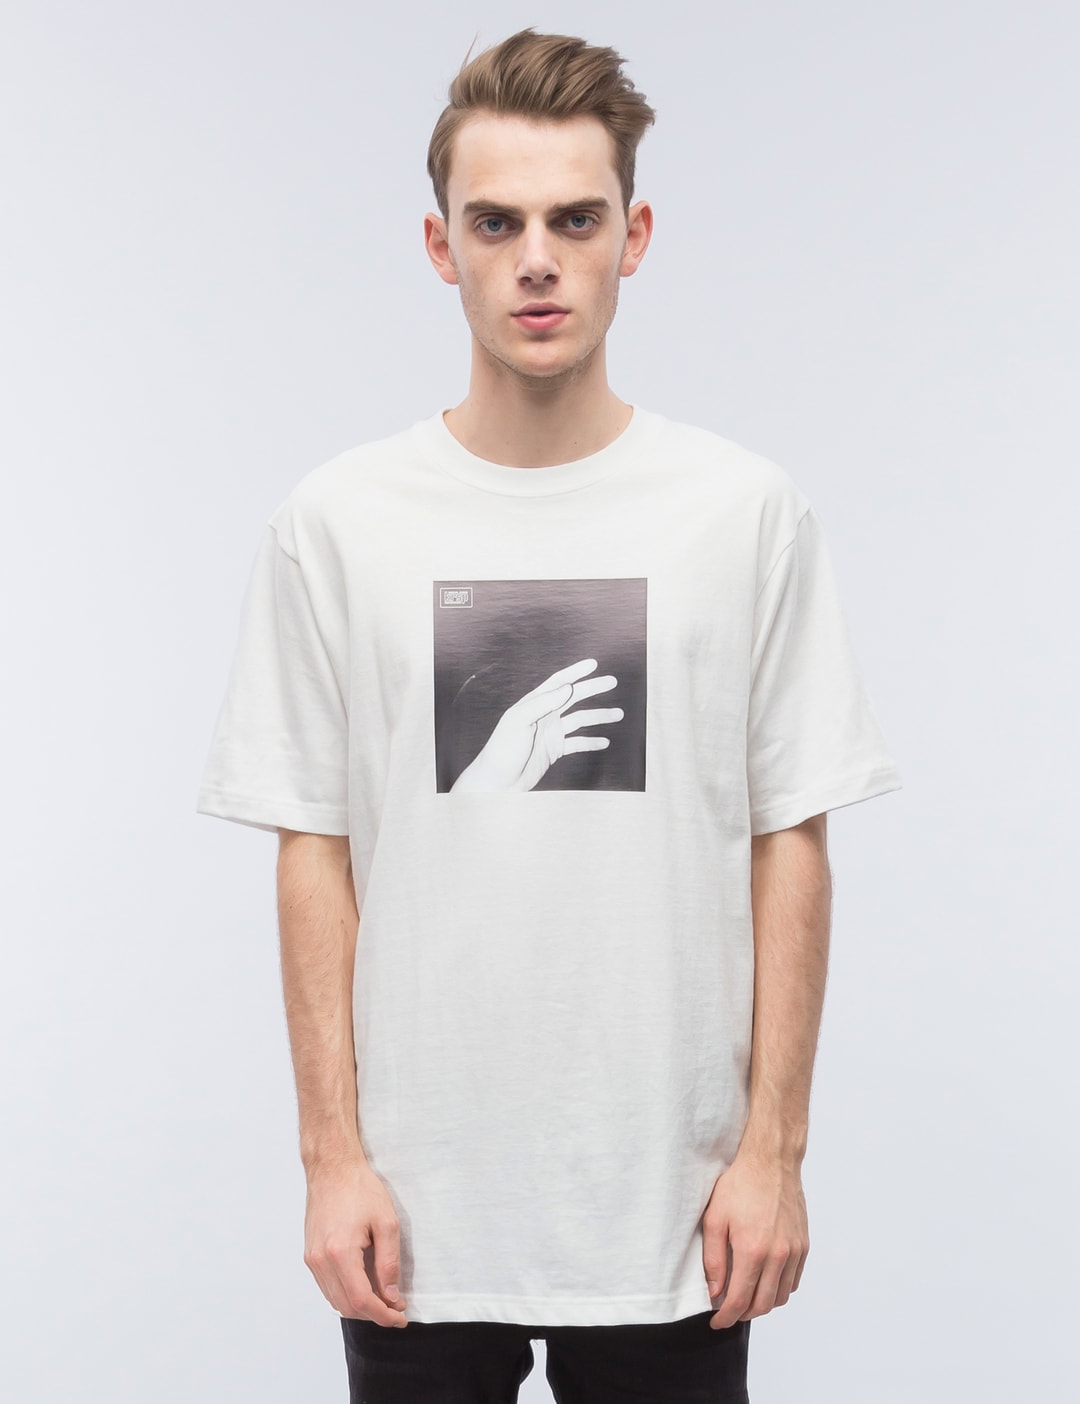 Krsp - Knock S/S T-Shirt | HBX - Globally Curated Fashion and Lifestyle ...